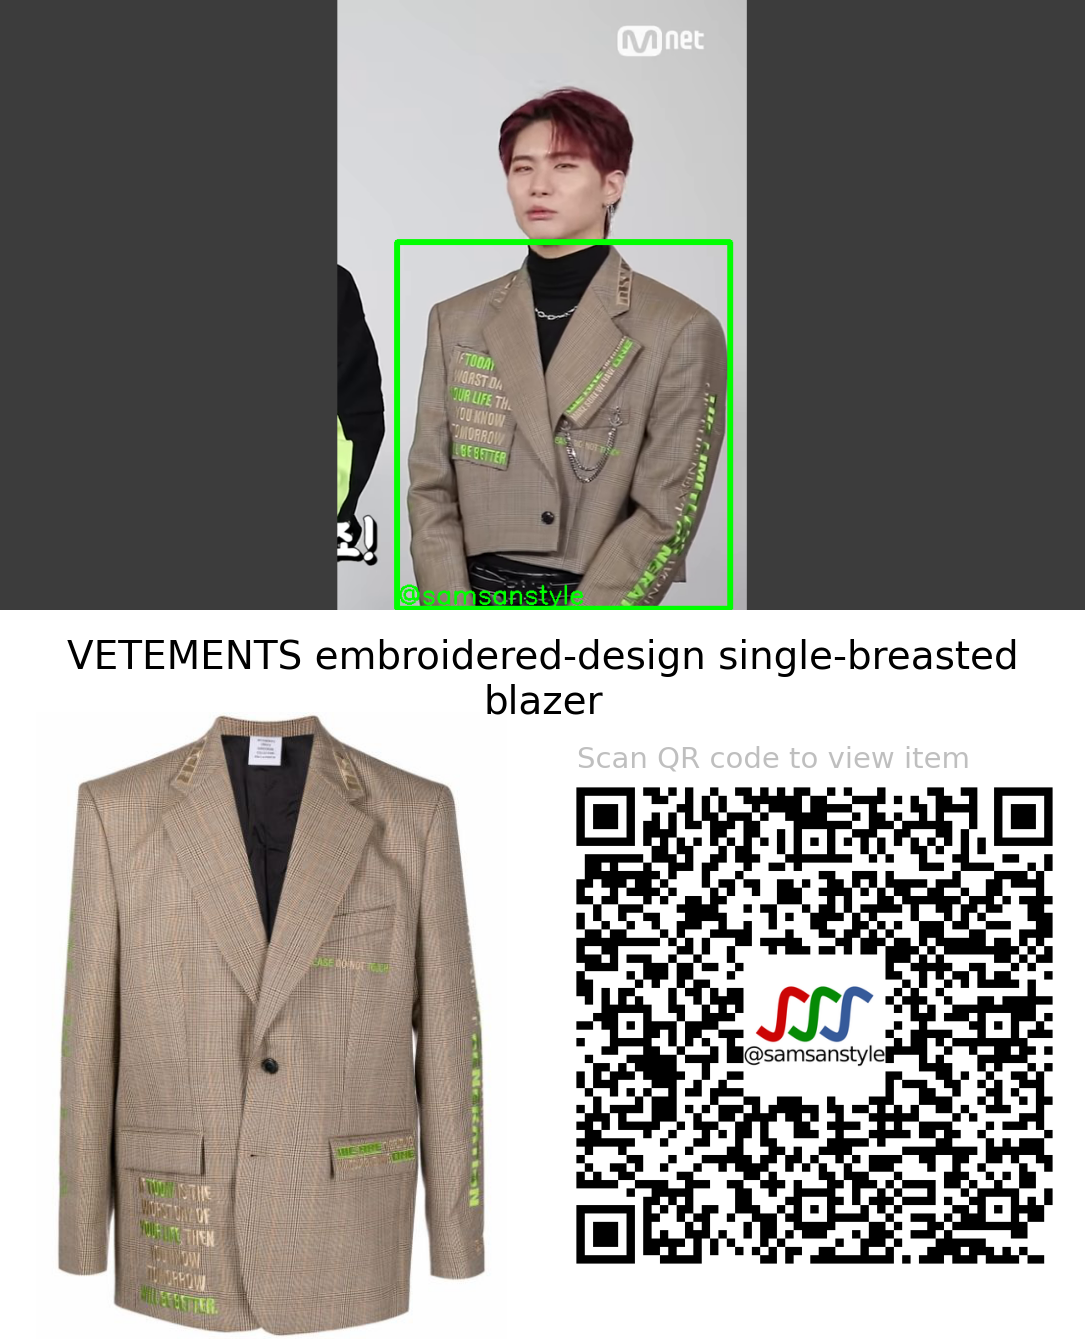 VICTON Seungsik | Shooting Chronograph Mnet M Countdown | VETEMENTS embroidered-design single-breasted blazer